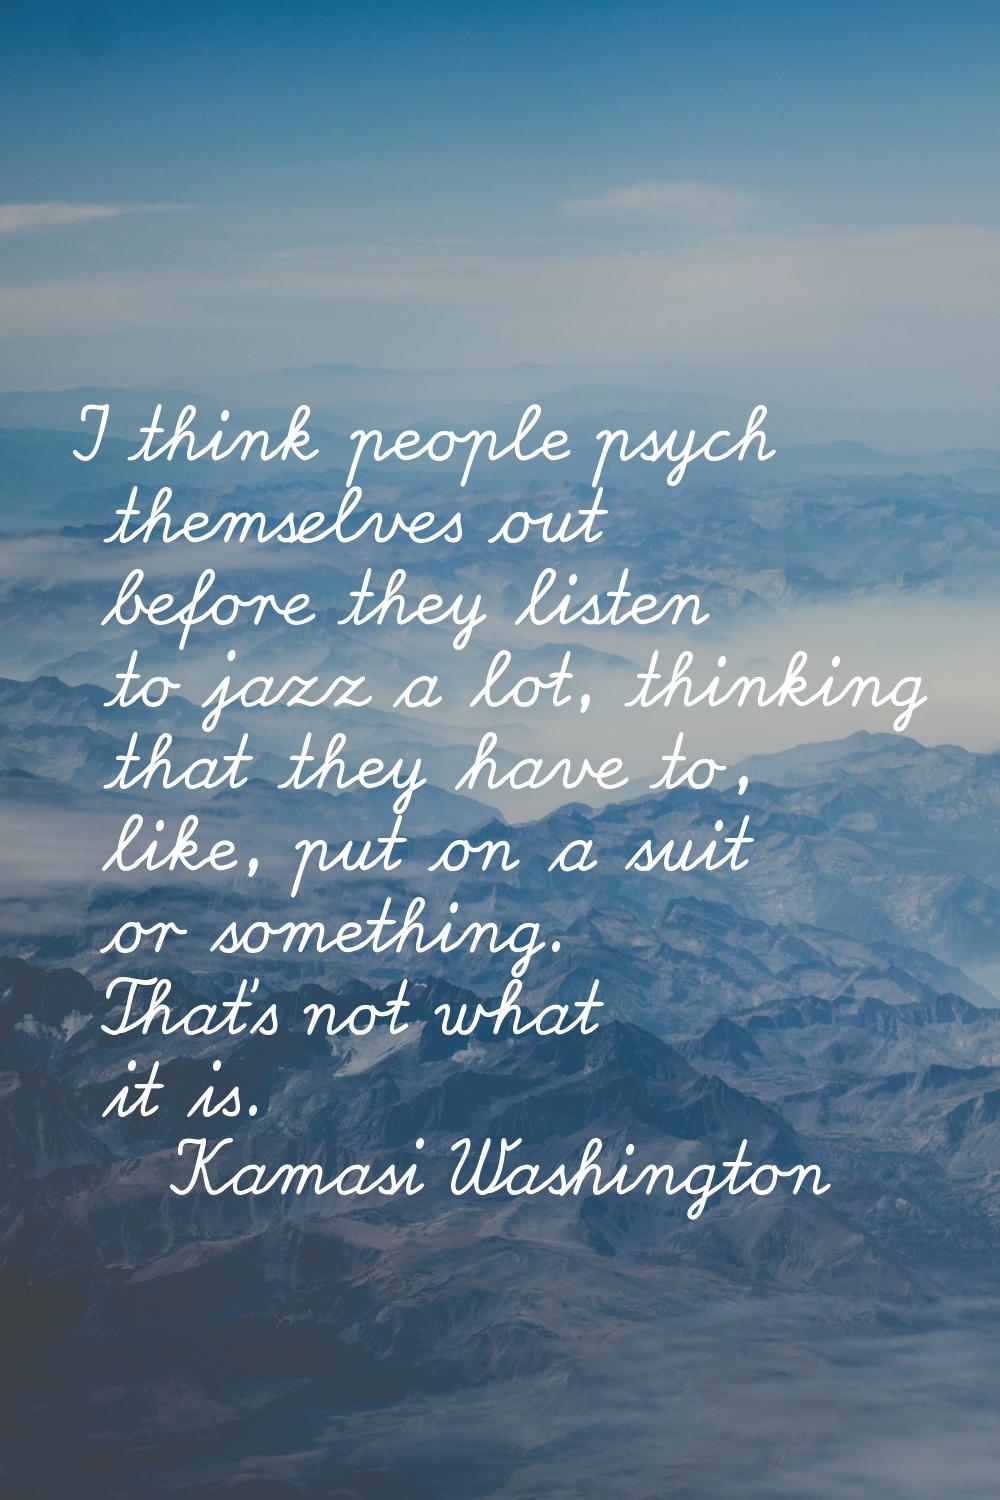 I think people psych themselves out before they listen to jazz a lot, thinking that they have to, l